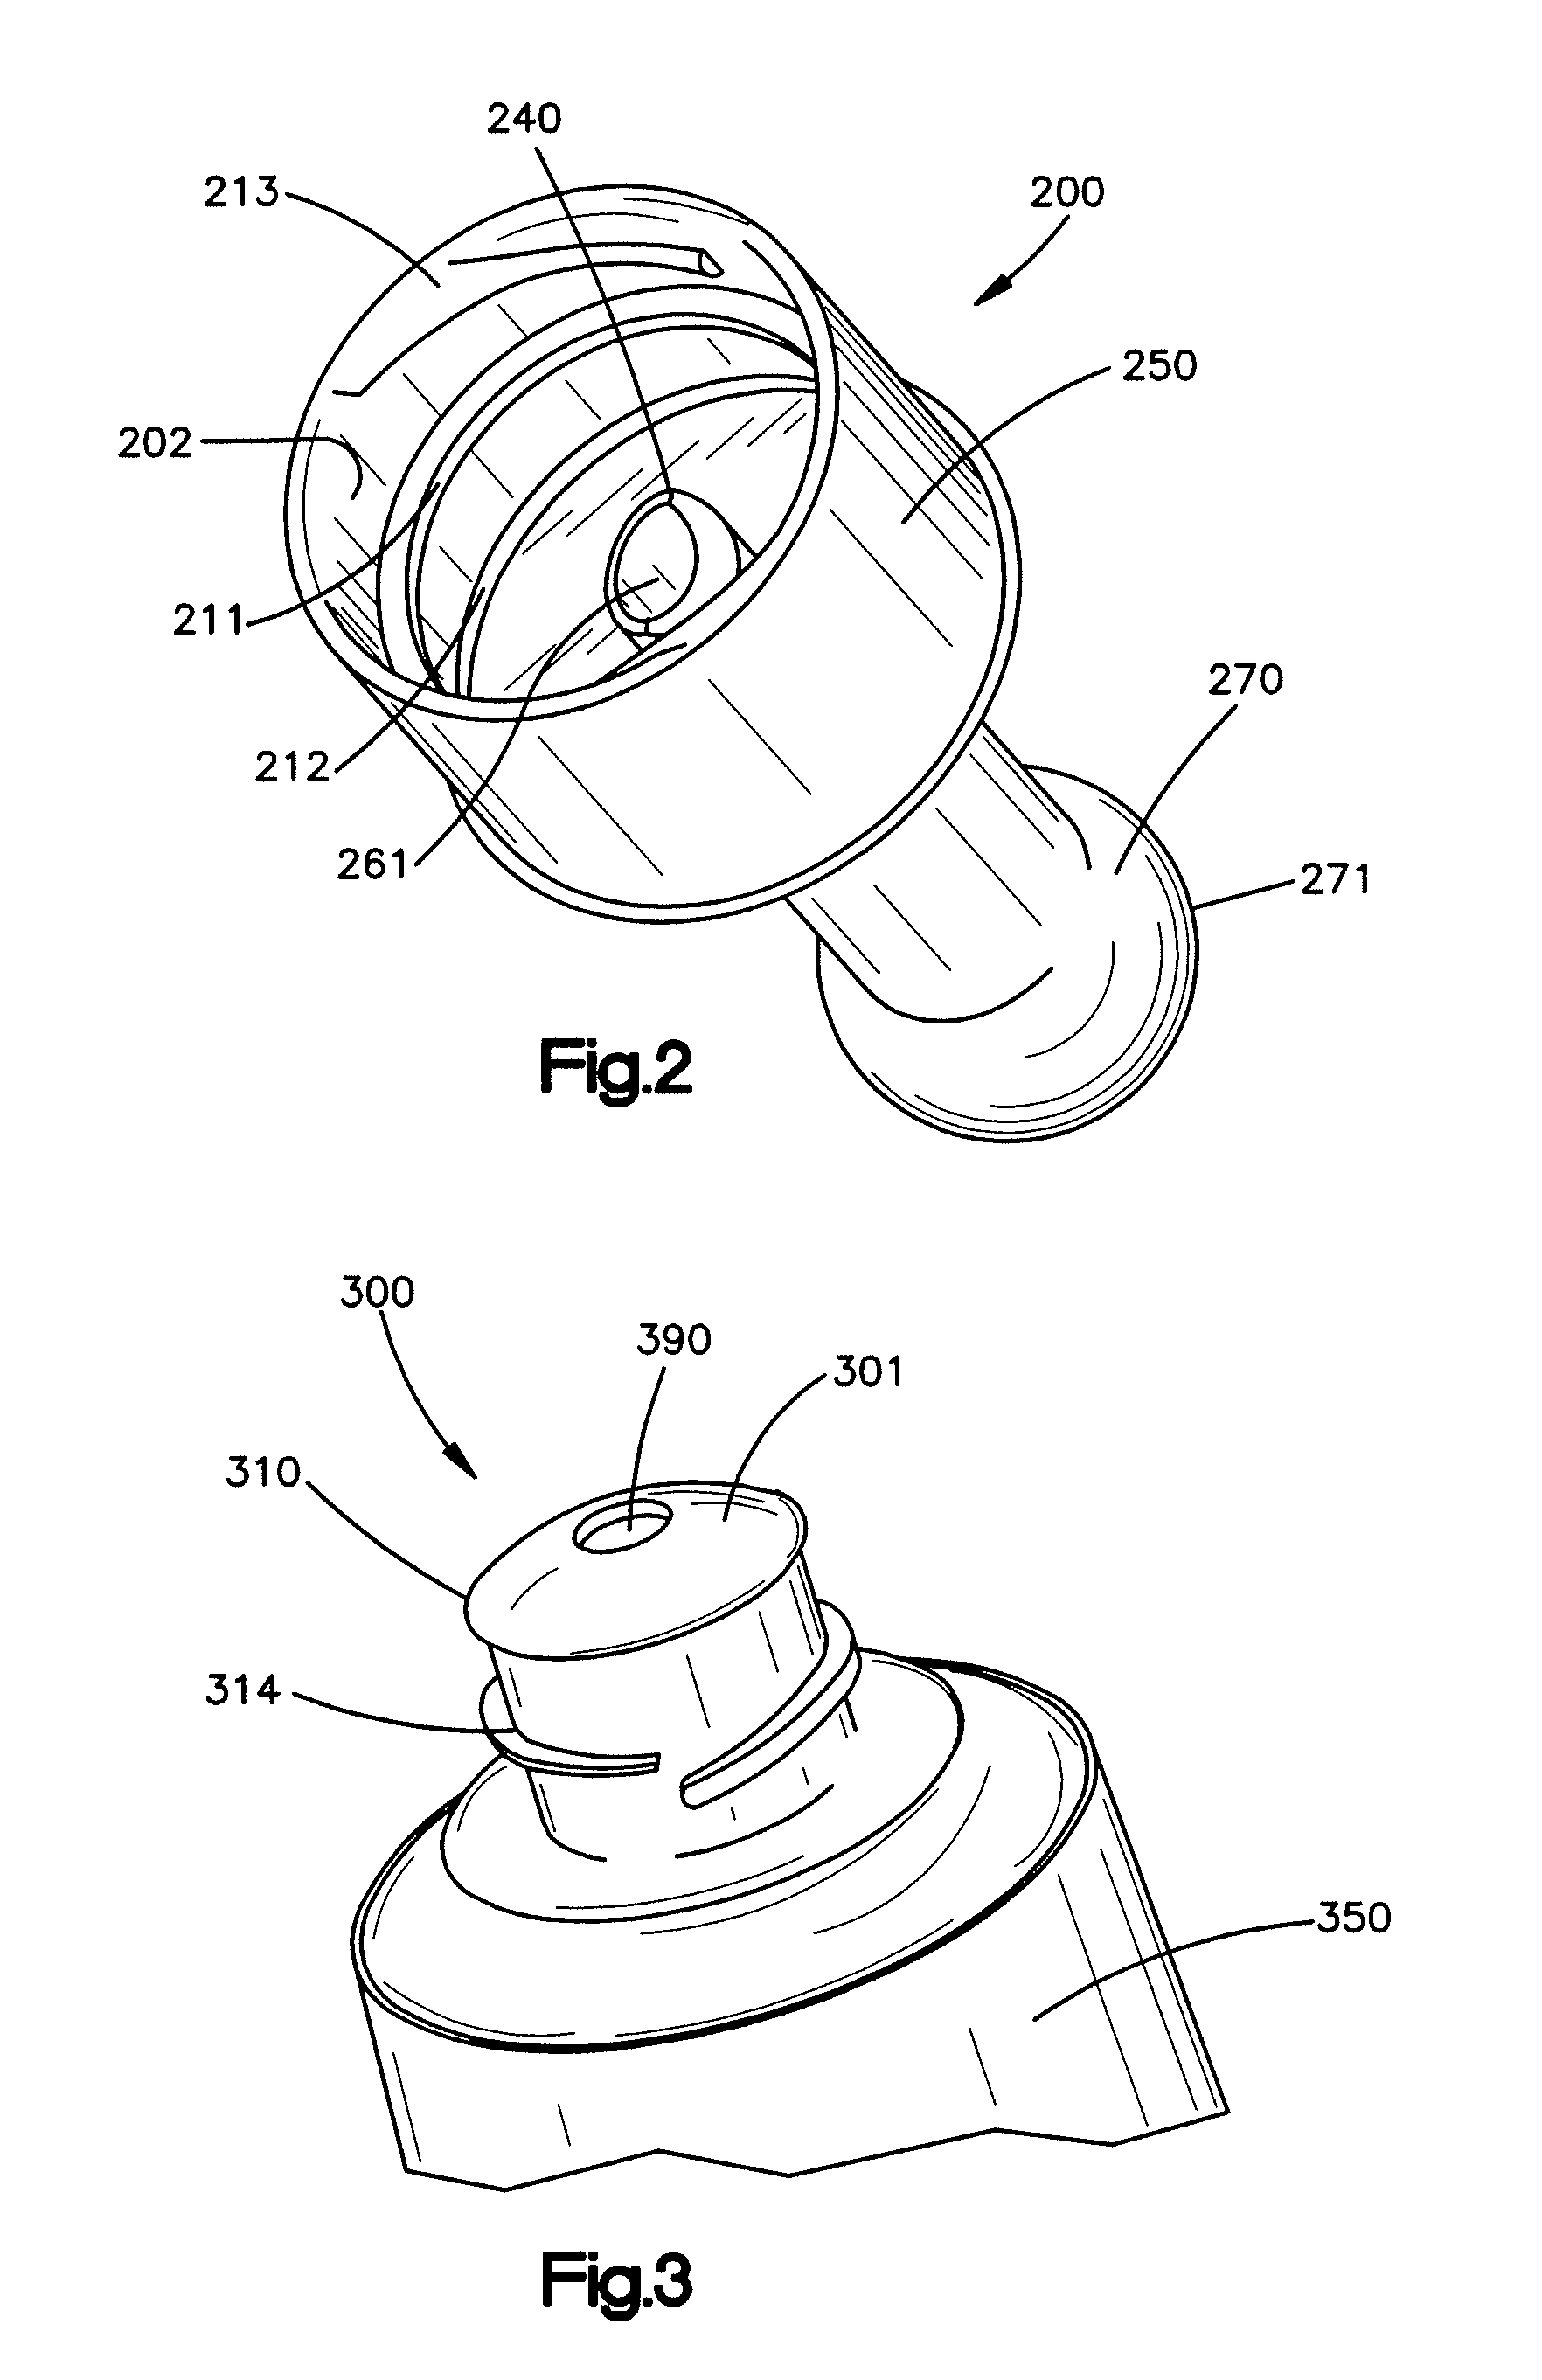 Fluid delivery assembly